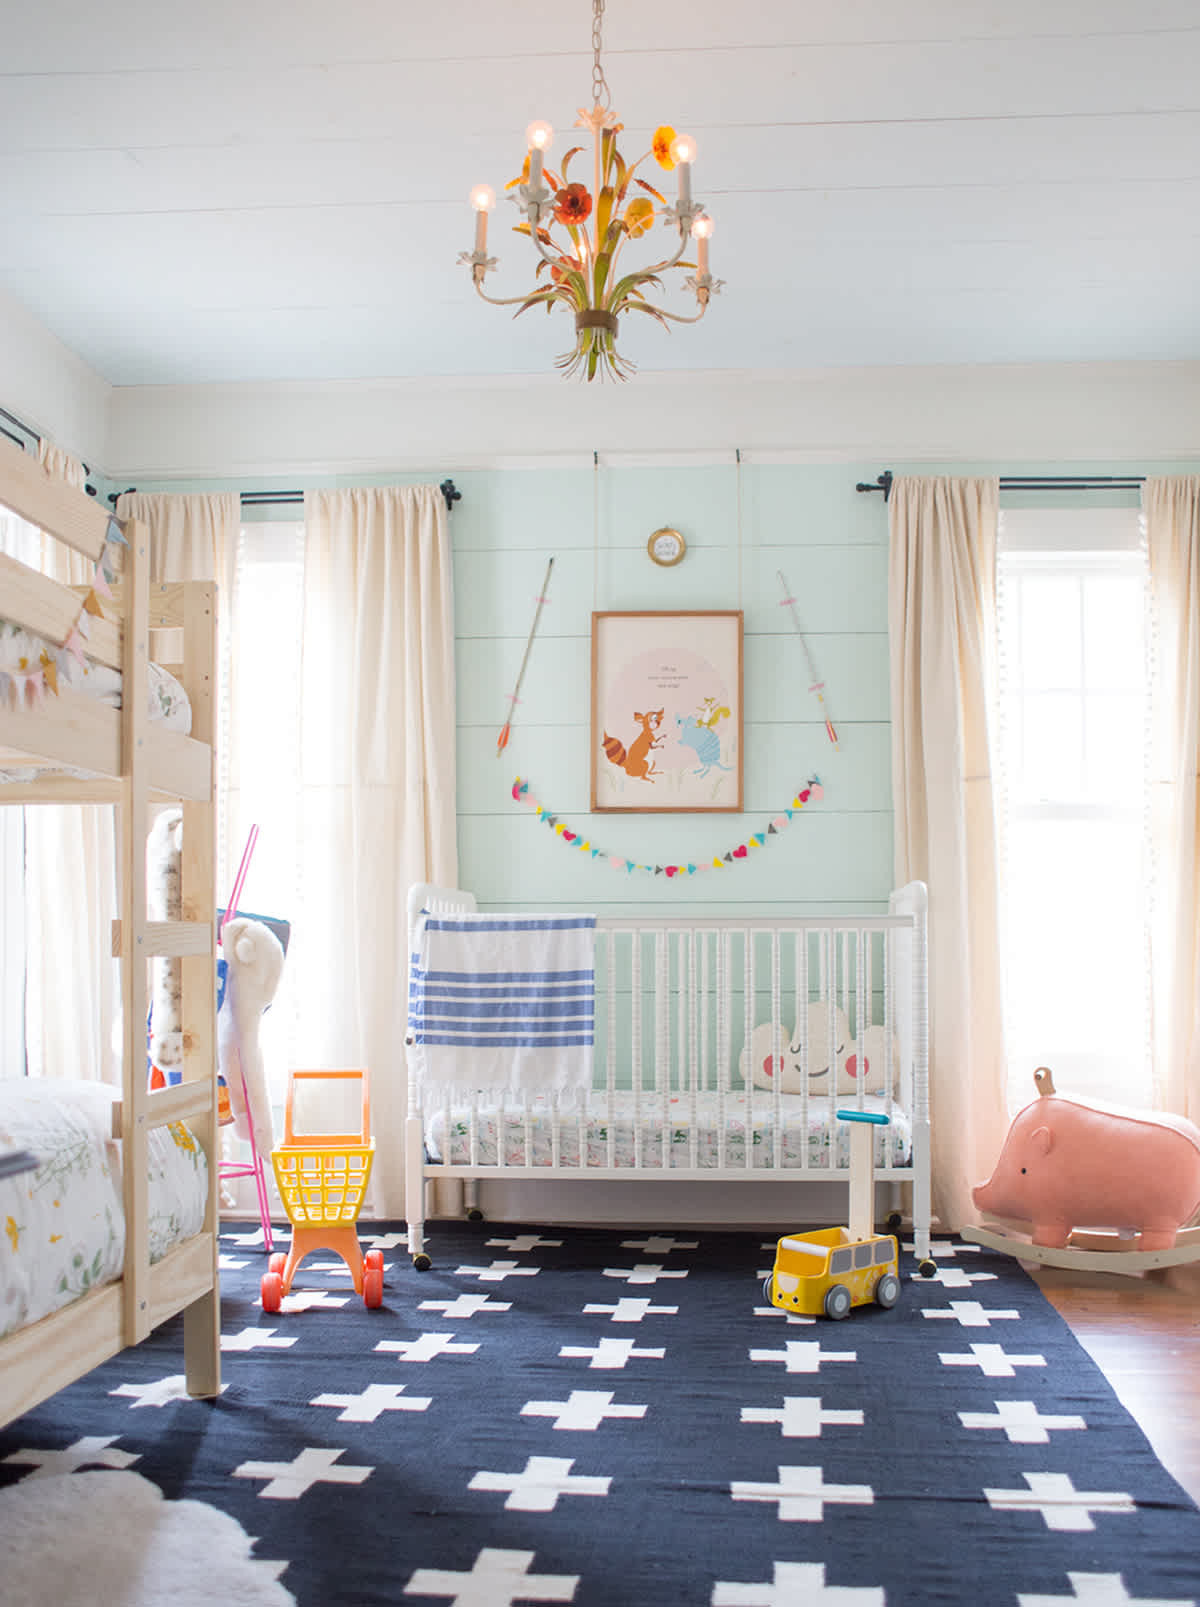 How To Paint Kids Room
 My Favorite Paint Colors For Kids Rooms And Baby Rooms